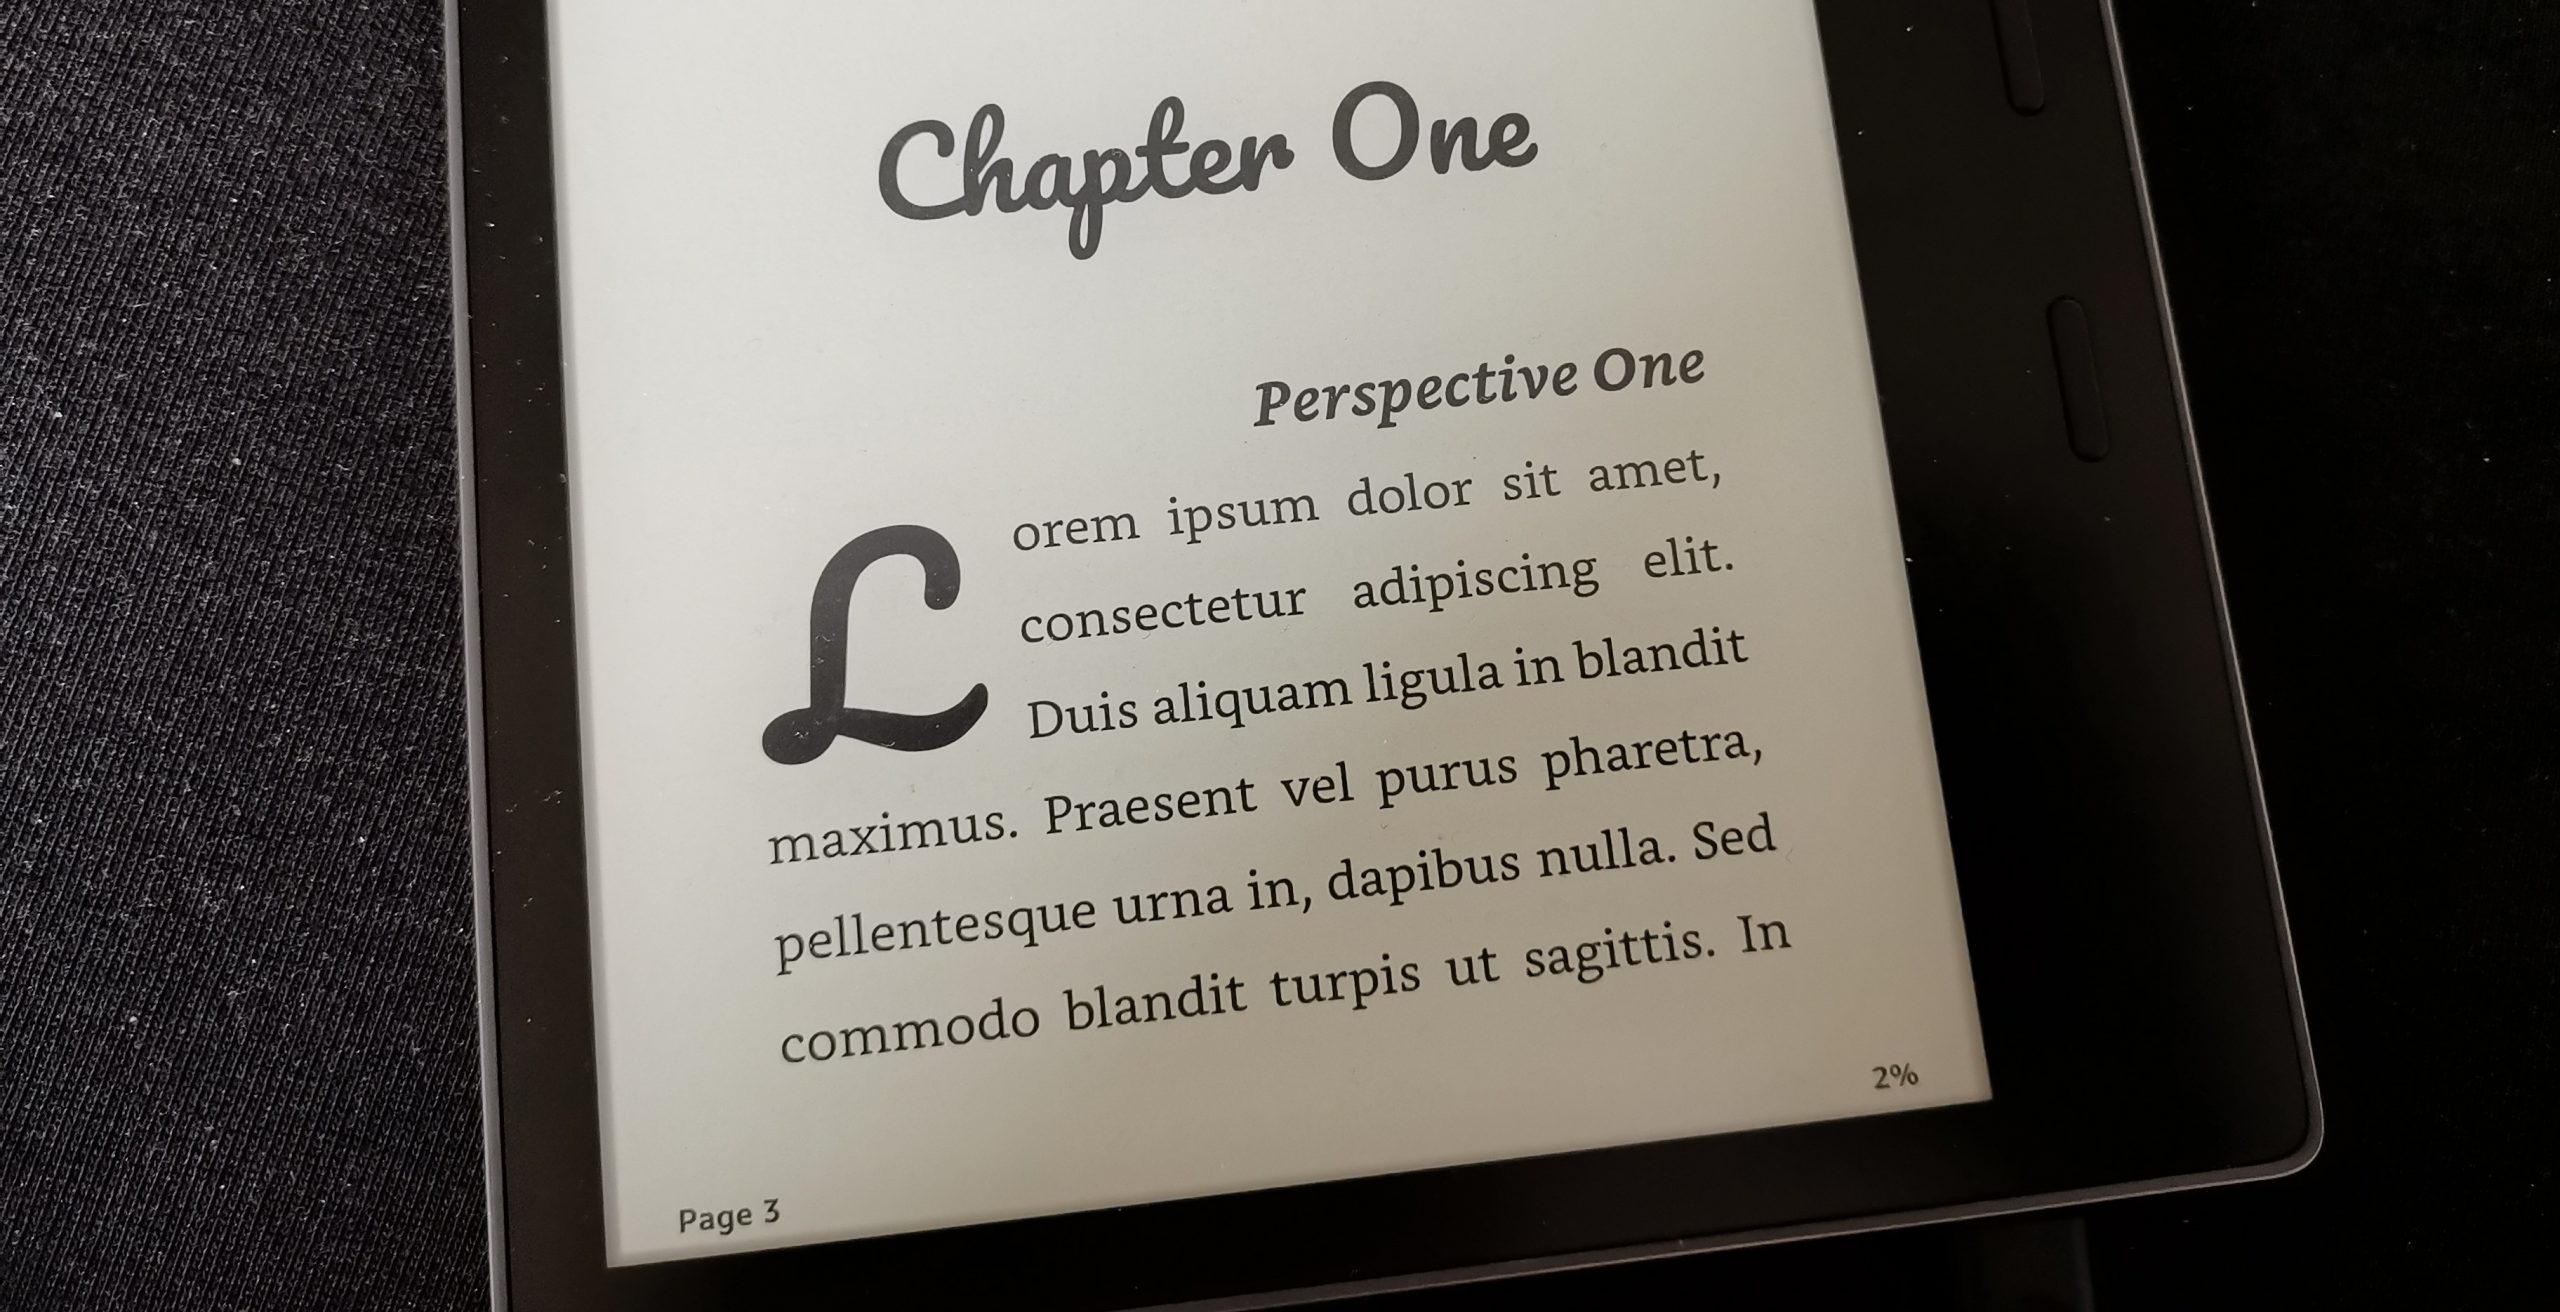 How to Create a Kindle eBook with Enhanced Typesetting using Word + Calibre